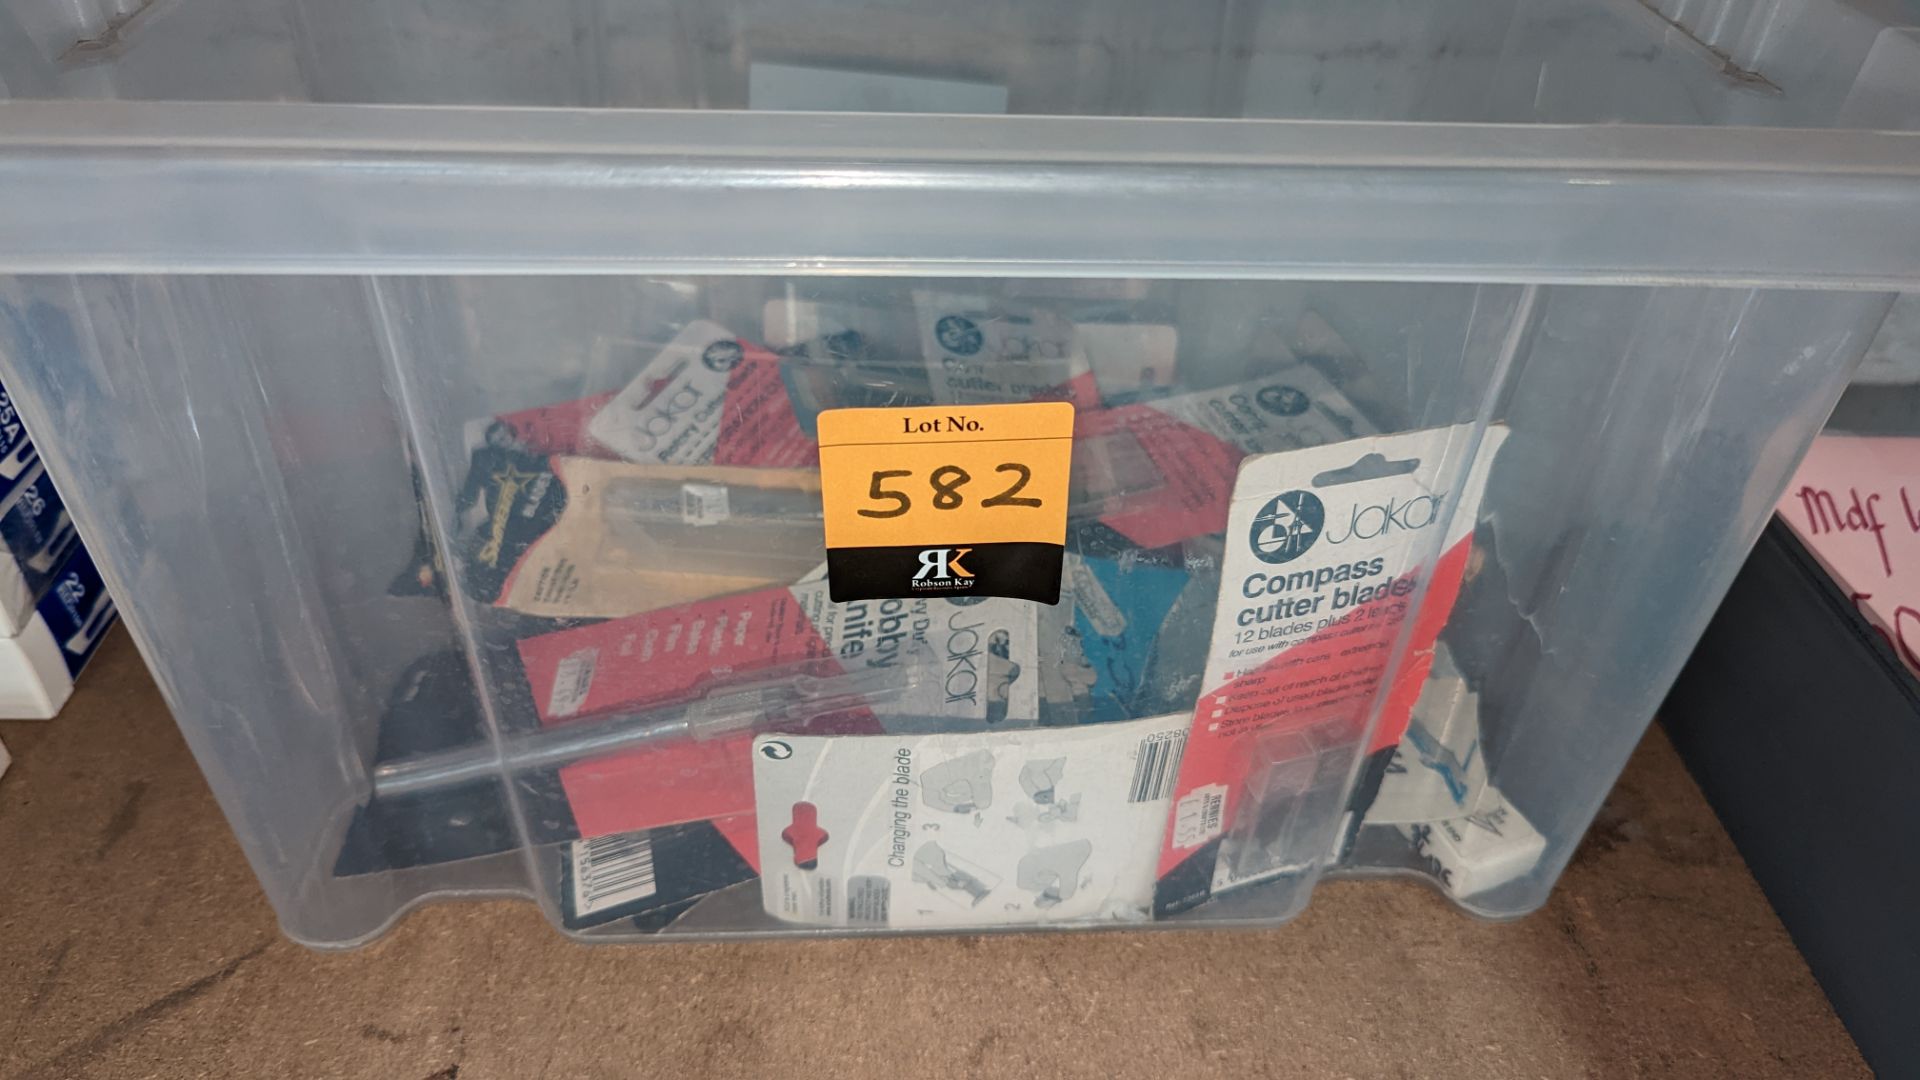 Contents of a crate of cutting blades & similar - crate excluded - Image 2 of 4